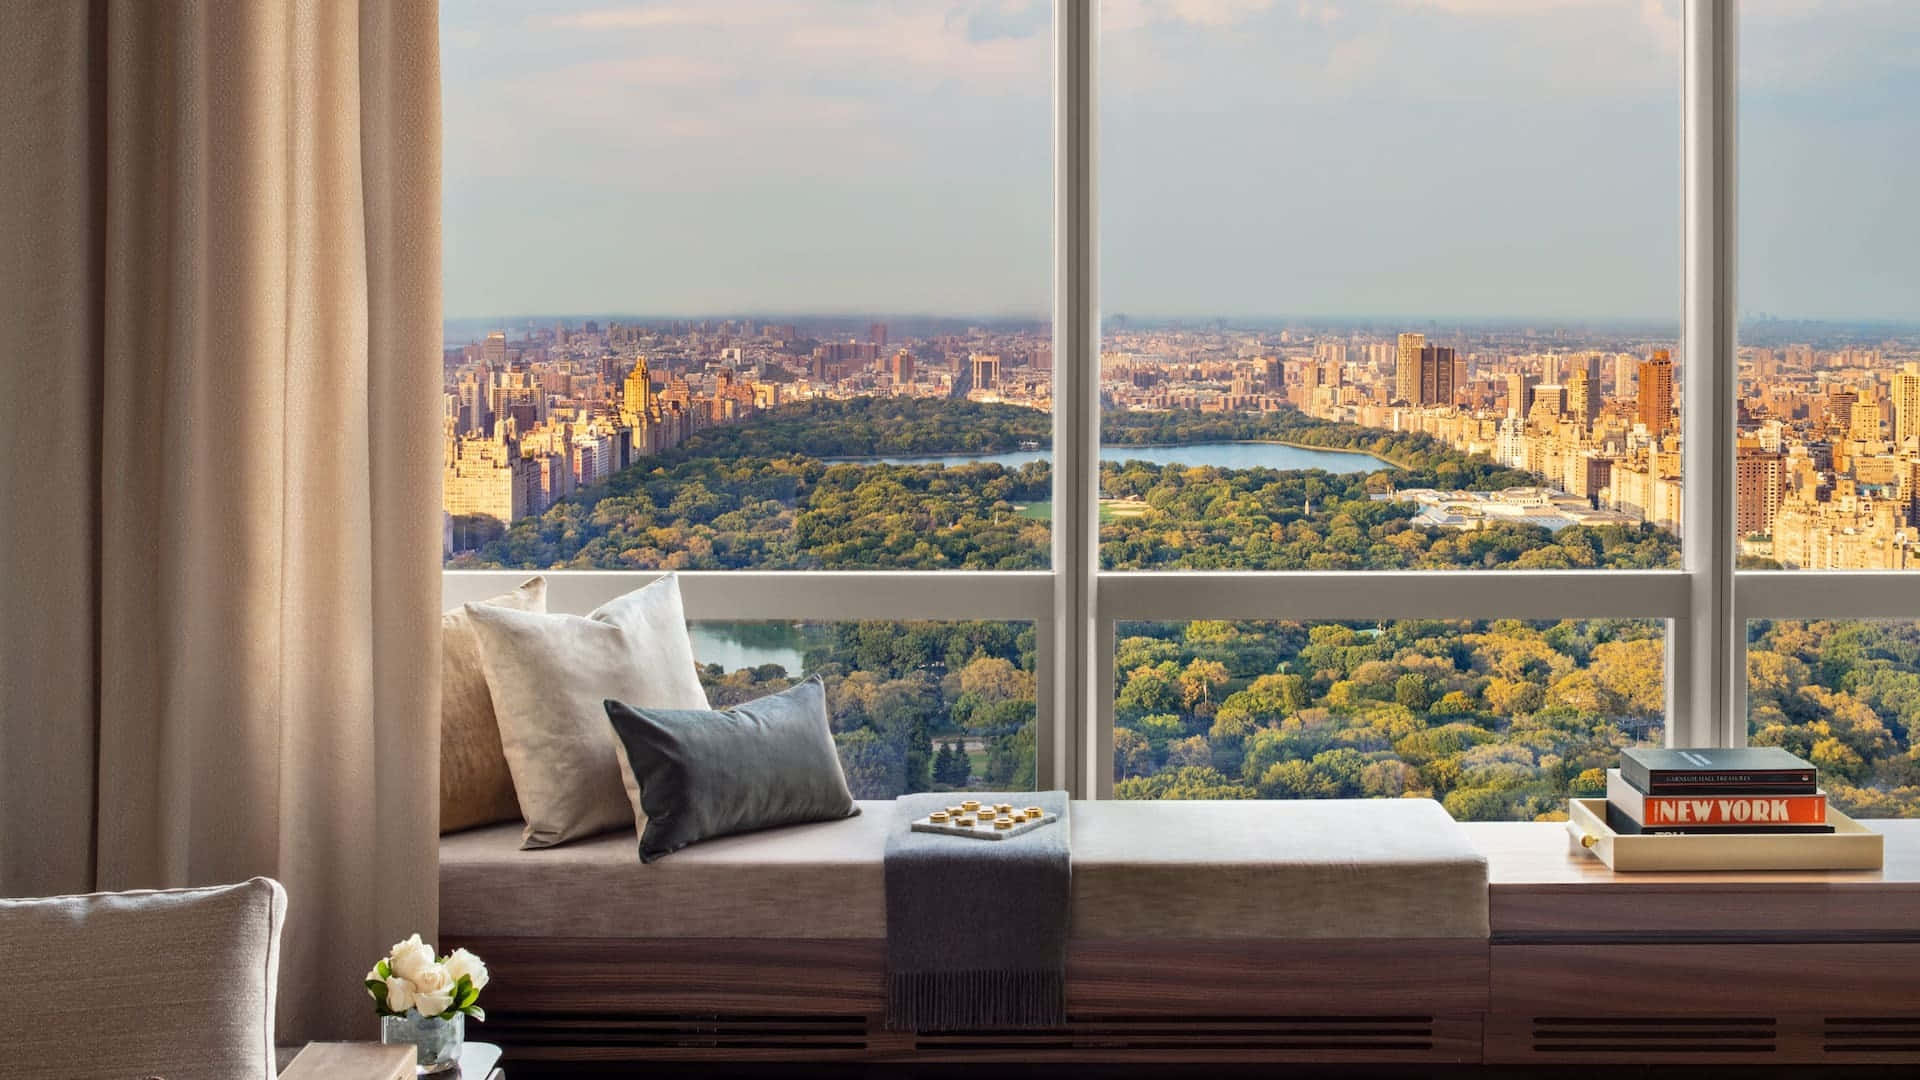 A View Of Central Park From A Window Seat